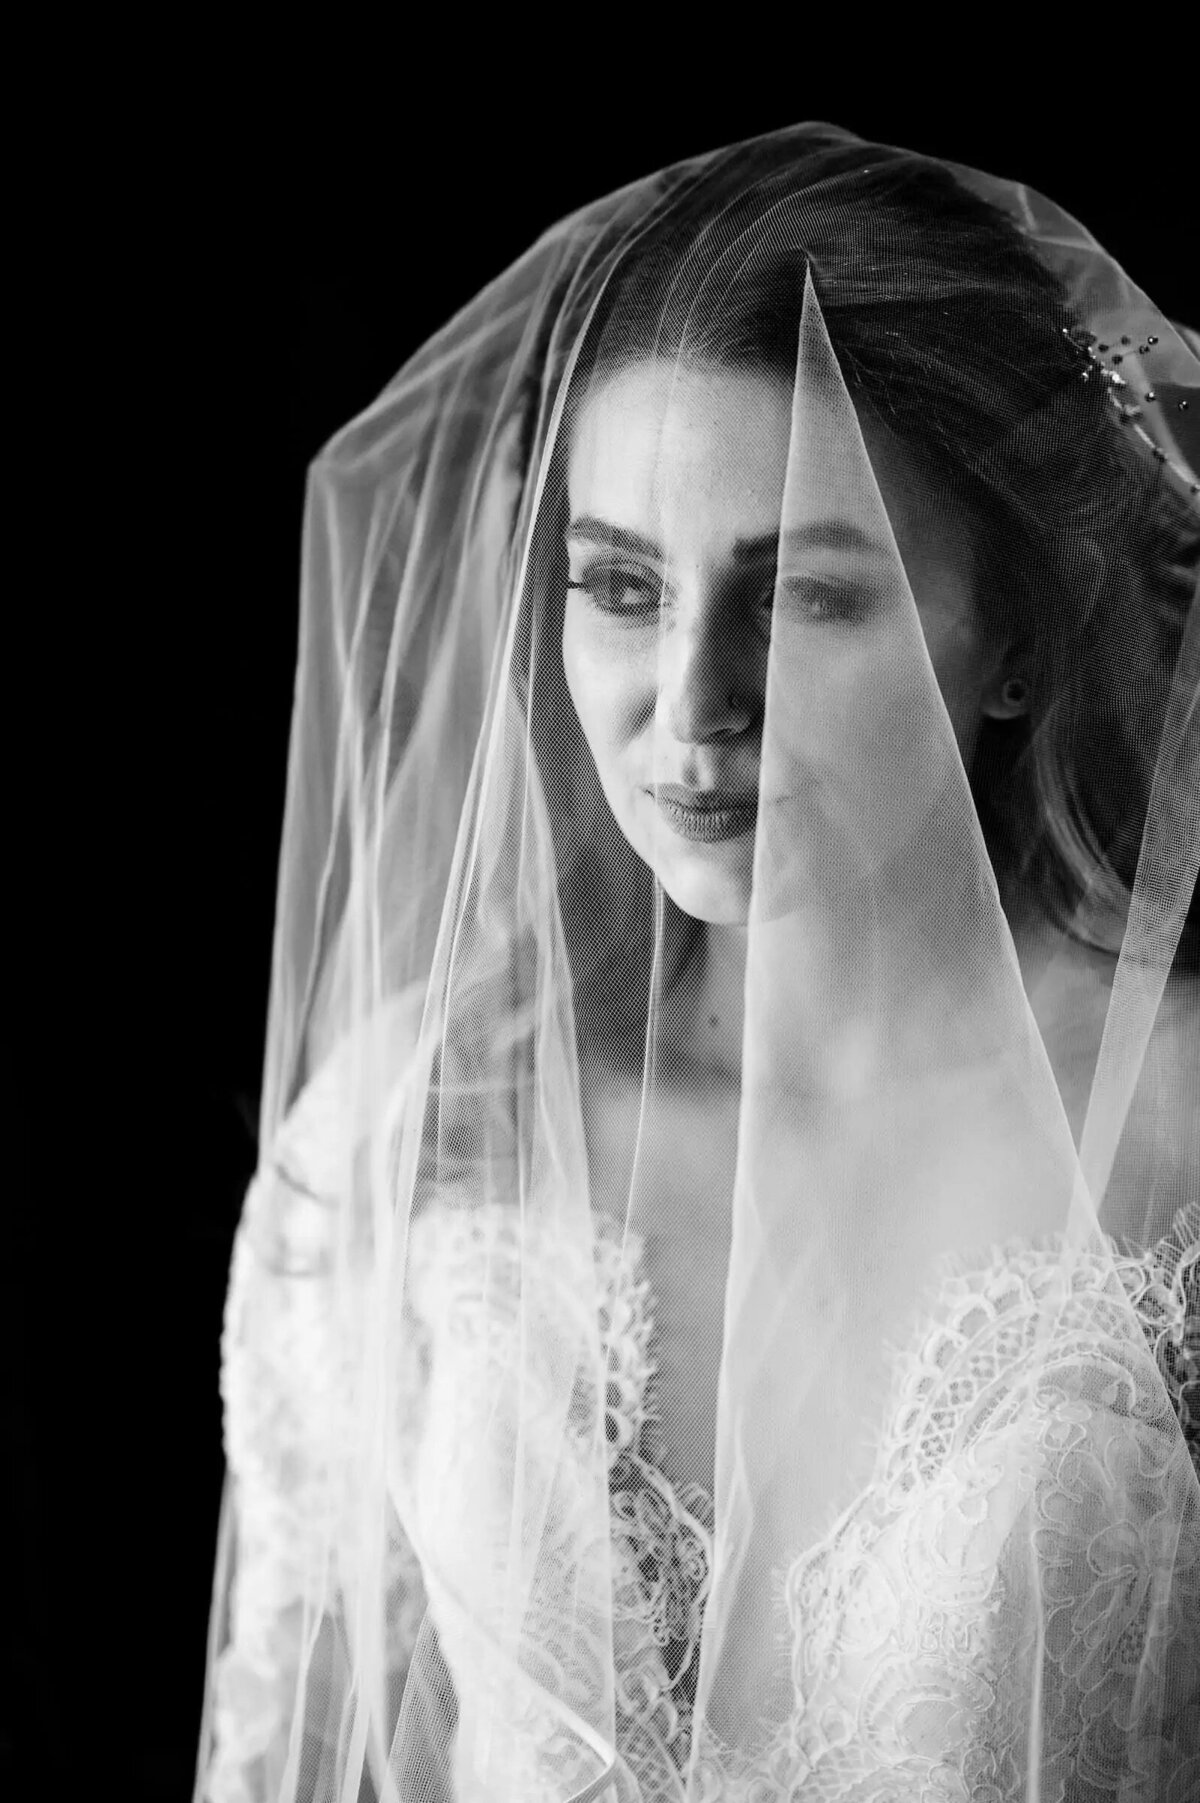 A soft and ethereal portrait of a bride looking downward, her face partially veiled, creating a sense of introspection and bridal elegance.